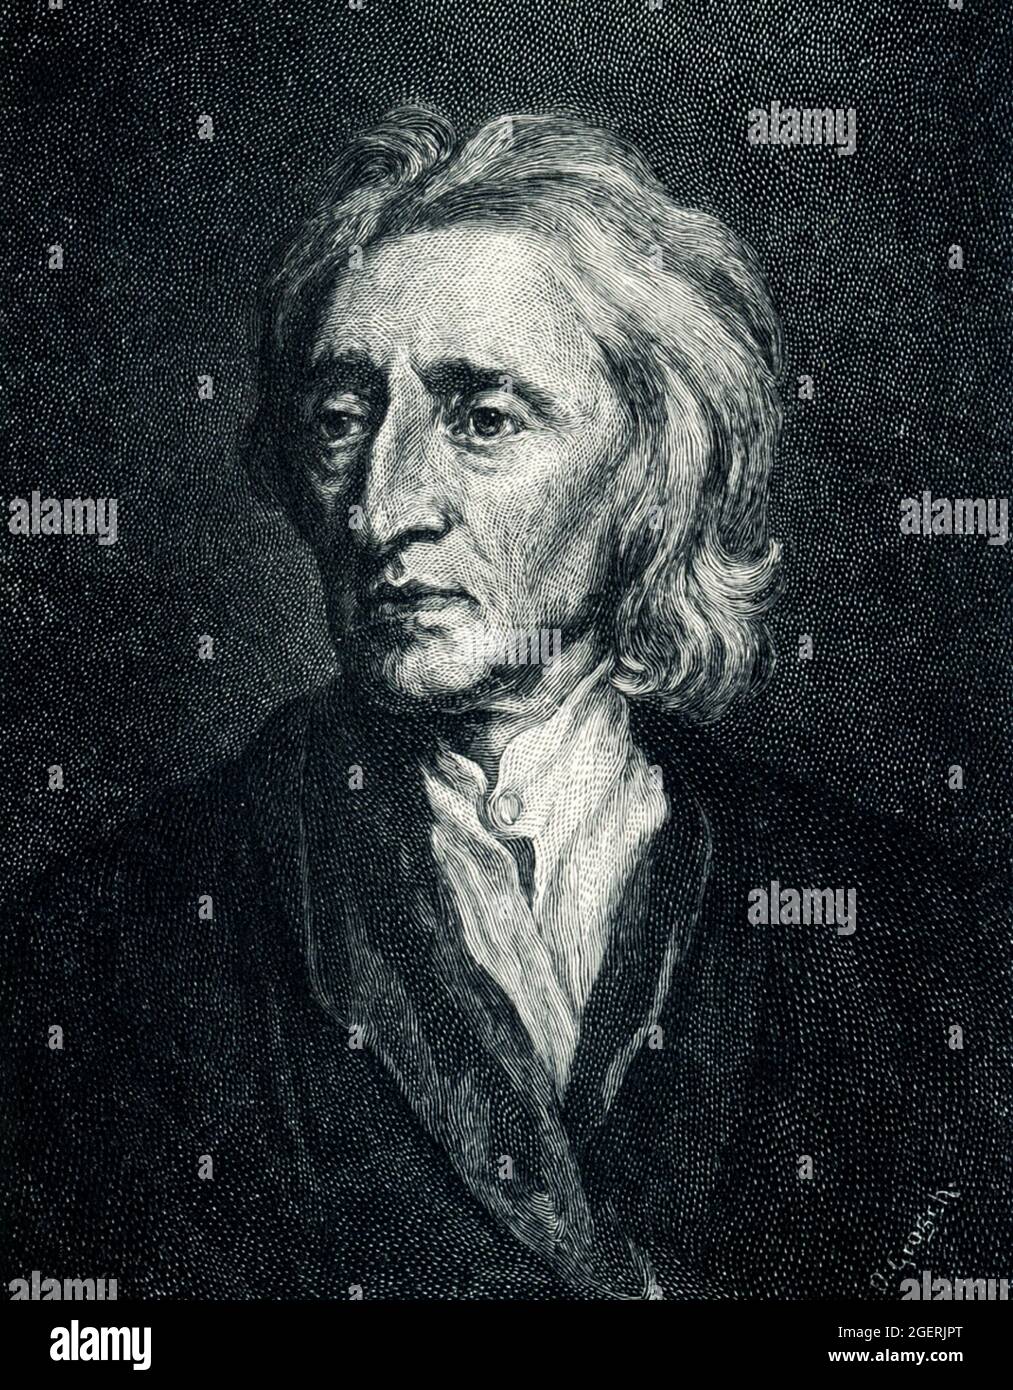 This 1899 illustration shows: “ John Locke  - painting by Sir Godfrey Keller. in the Hermitage in St Petersburg,” John Locke (b. 1632, d. 1704) was a British philosopher, Oxford academic and medical researcher. Sir Godfrey Kneller (died 1723), 1st Baronet, was the leading portrait painter in England during the late 17th and early 18th centuries, and was court painter to English and British monarchs from Charles II to George I. Stock Photo